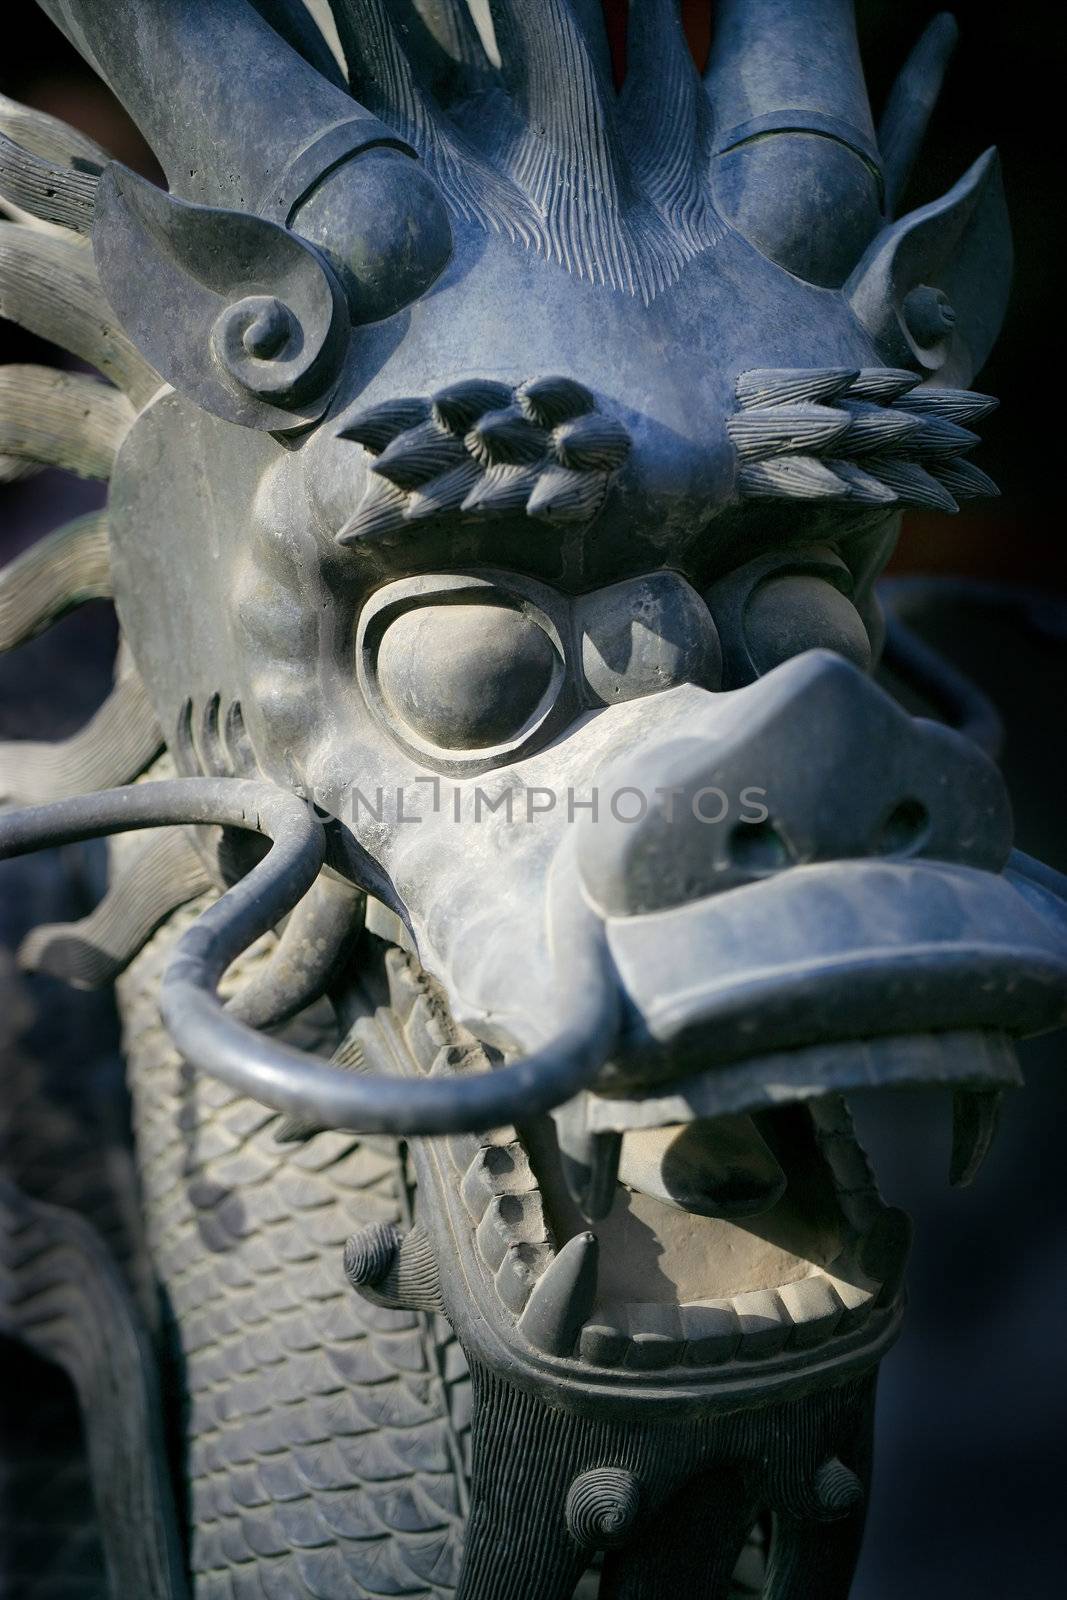 Closeup of the dragon in the Imperial Palace in Beijing, China. (short depth of field, focusing on the eye)
